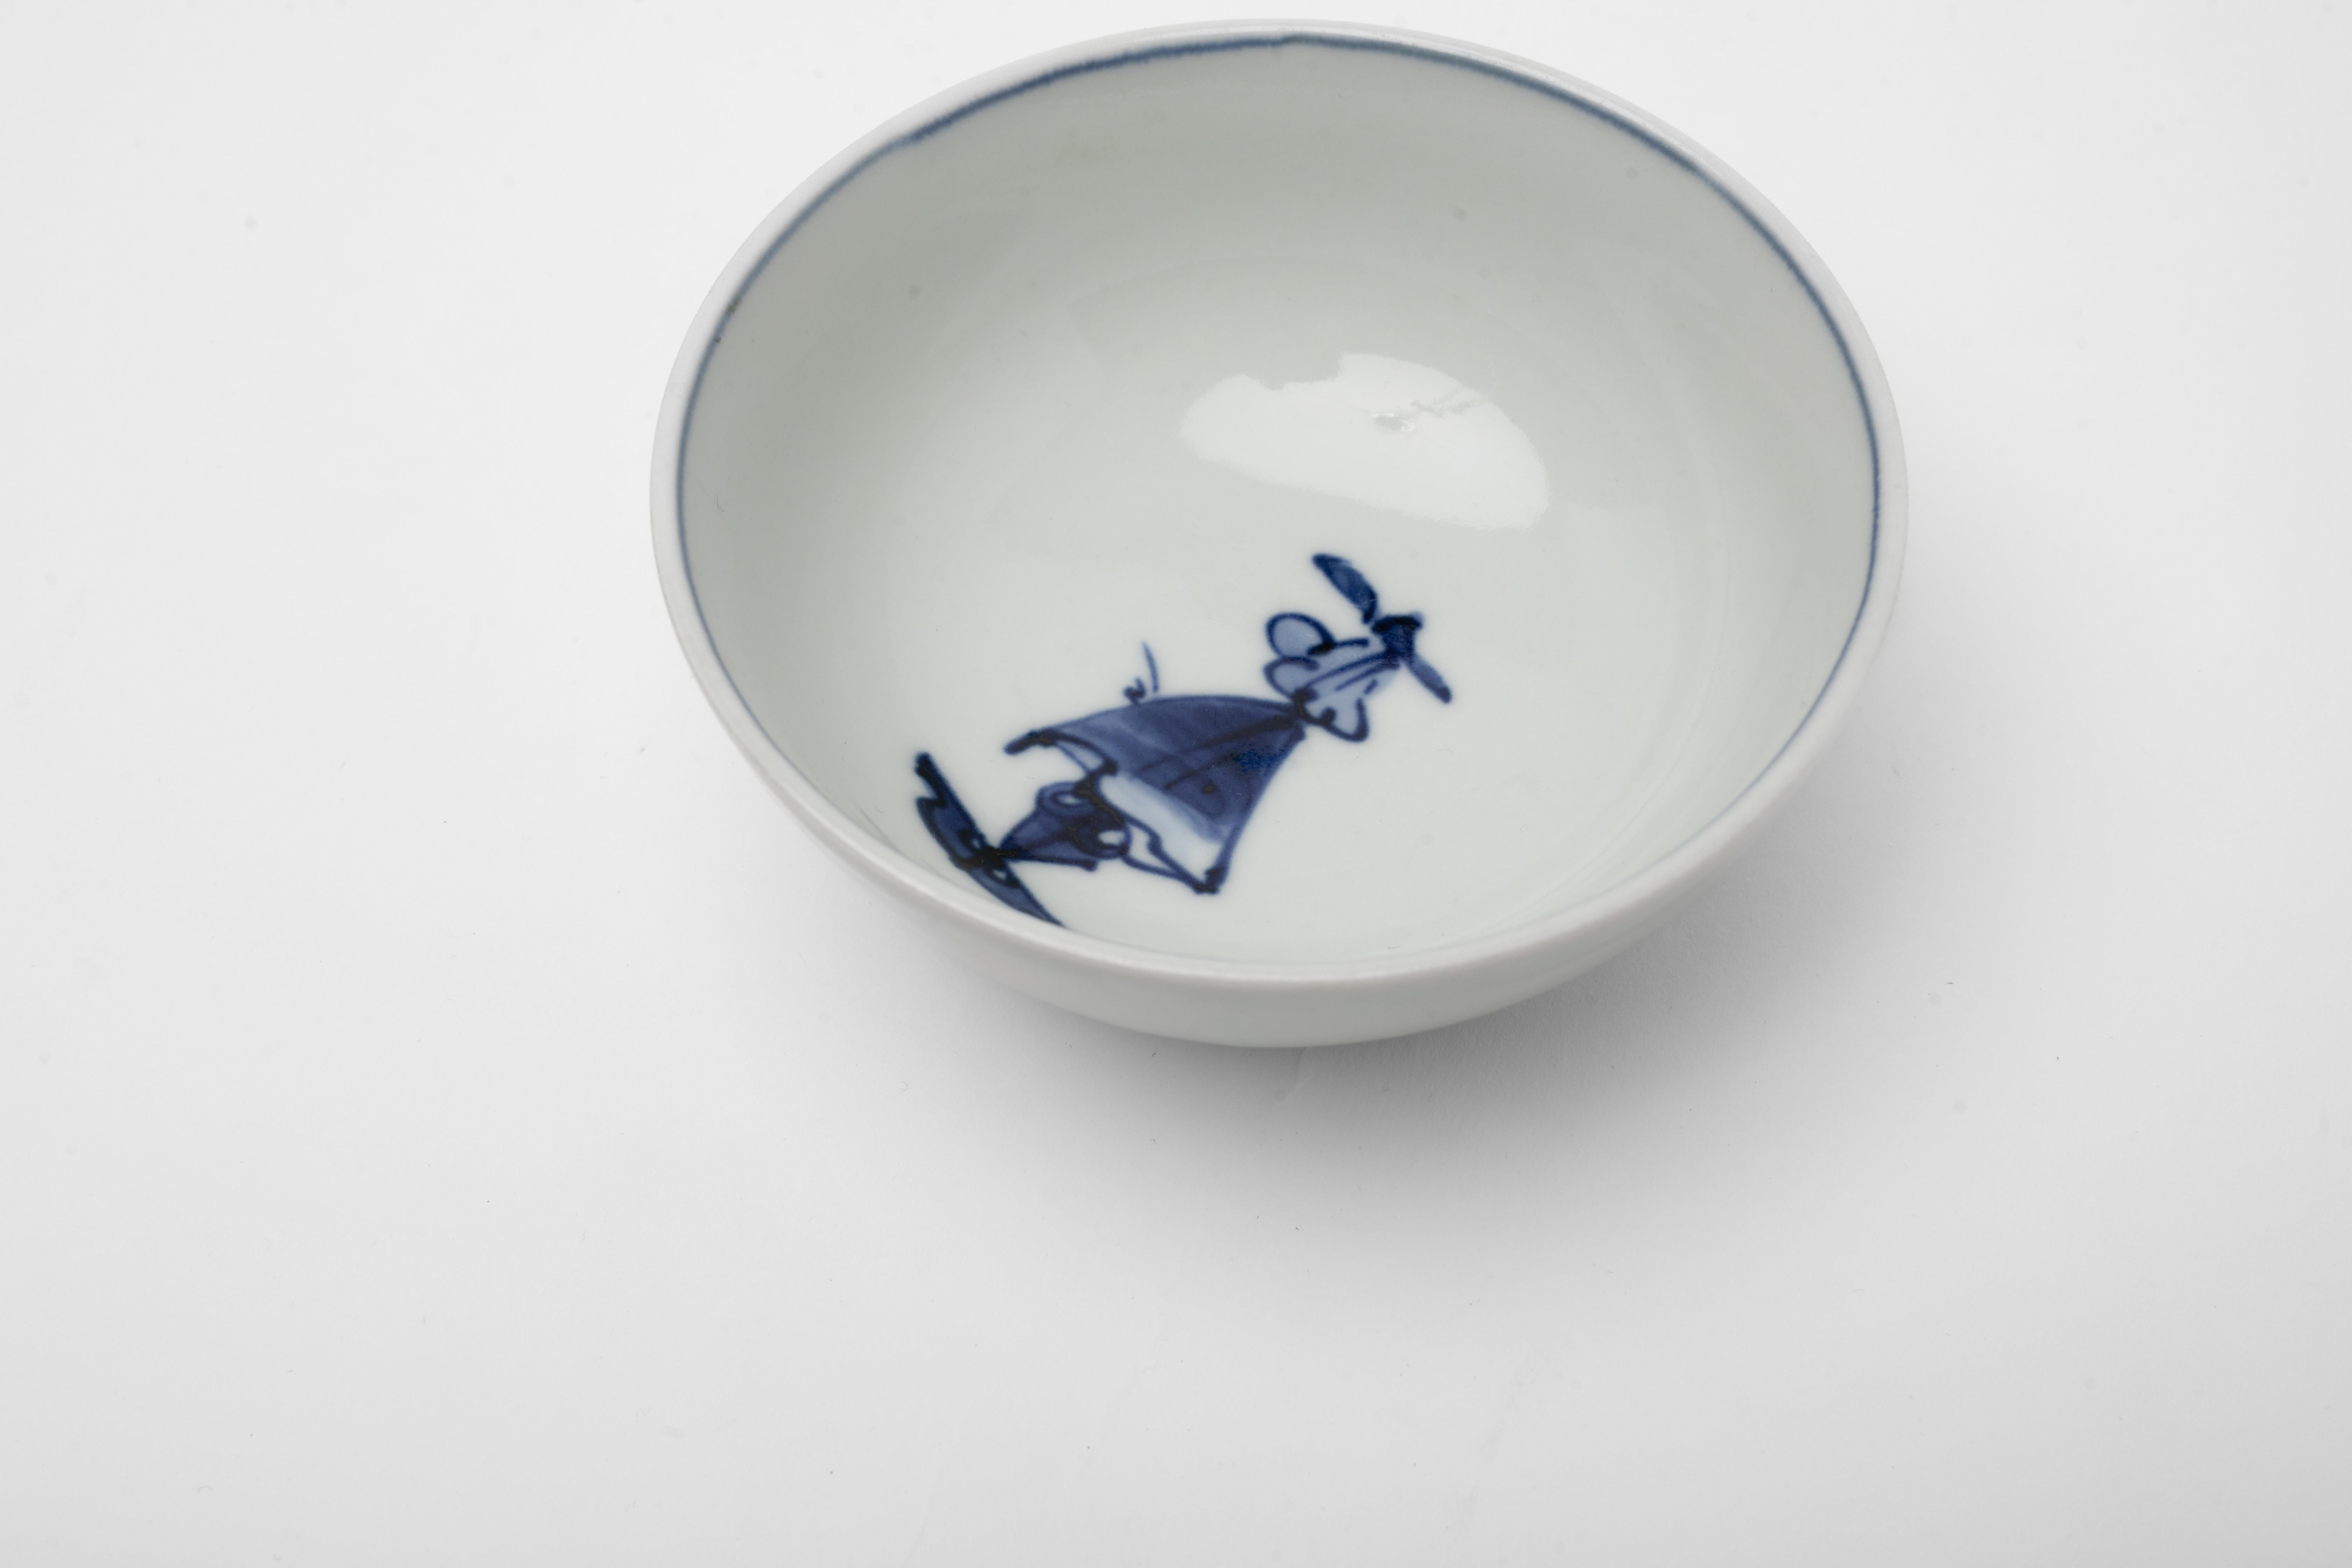 A beautiful porcelain bowl from Japan. A piece which has unique characteristics such as the mythical boat motif in the centre of the bowl.

It has a special feeling - somewhat minimalist - somewhat spiritual. The design of the ship feels very